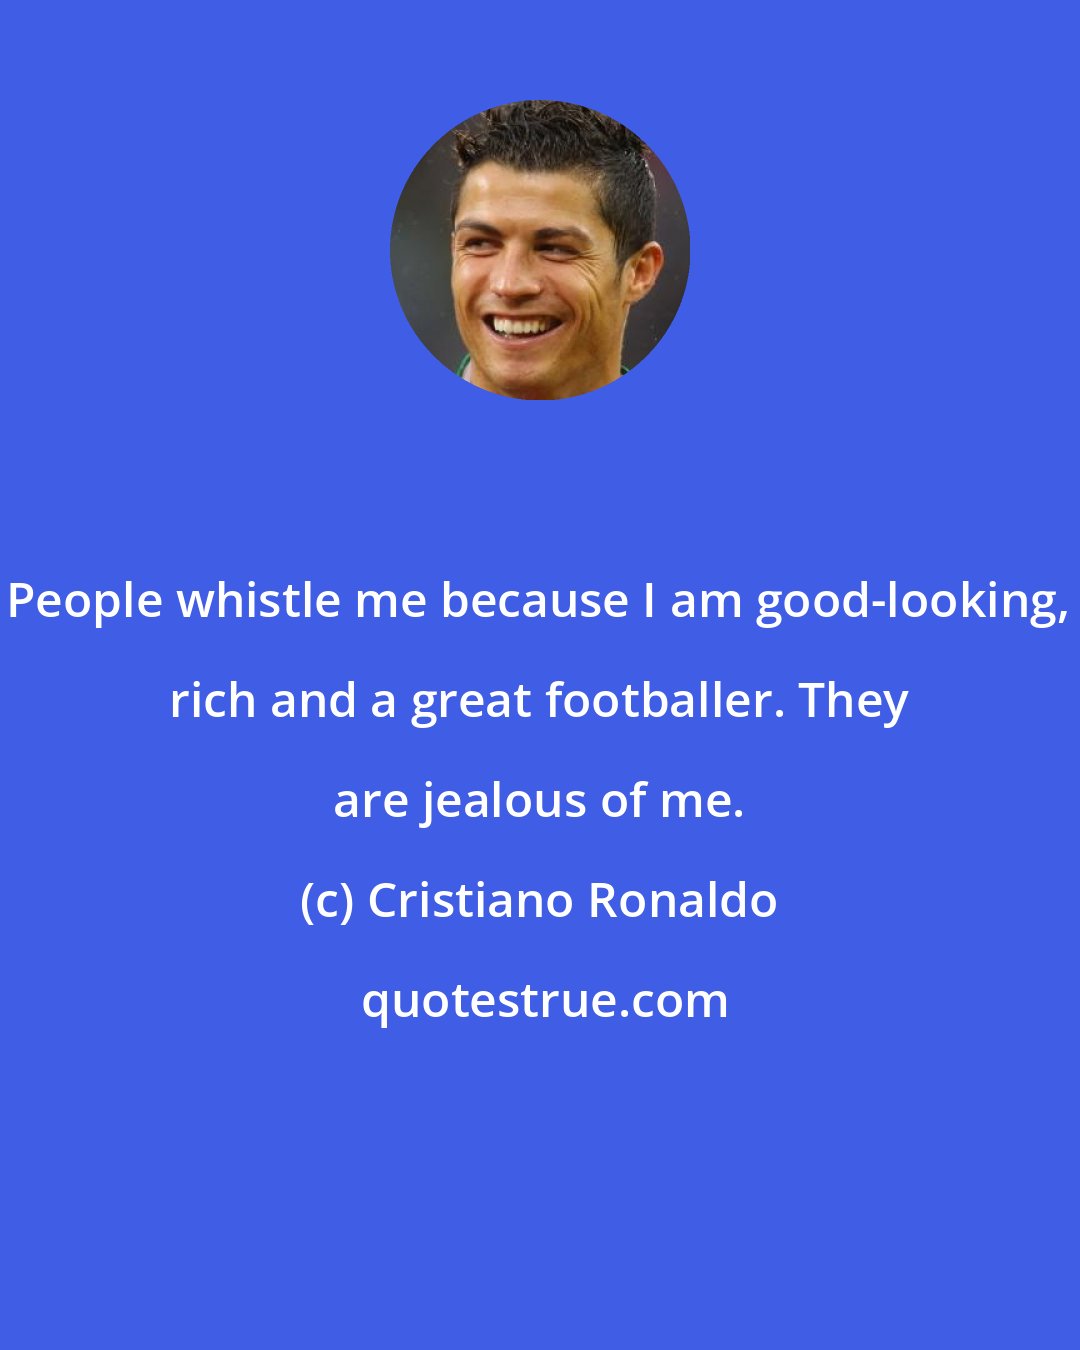 Cristiano Ronaldo: People whistle me because I am good-looking, rich and a great footballer. They are jealous of me.